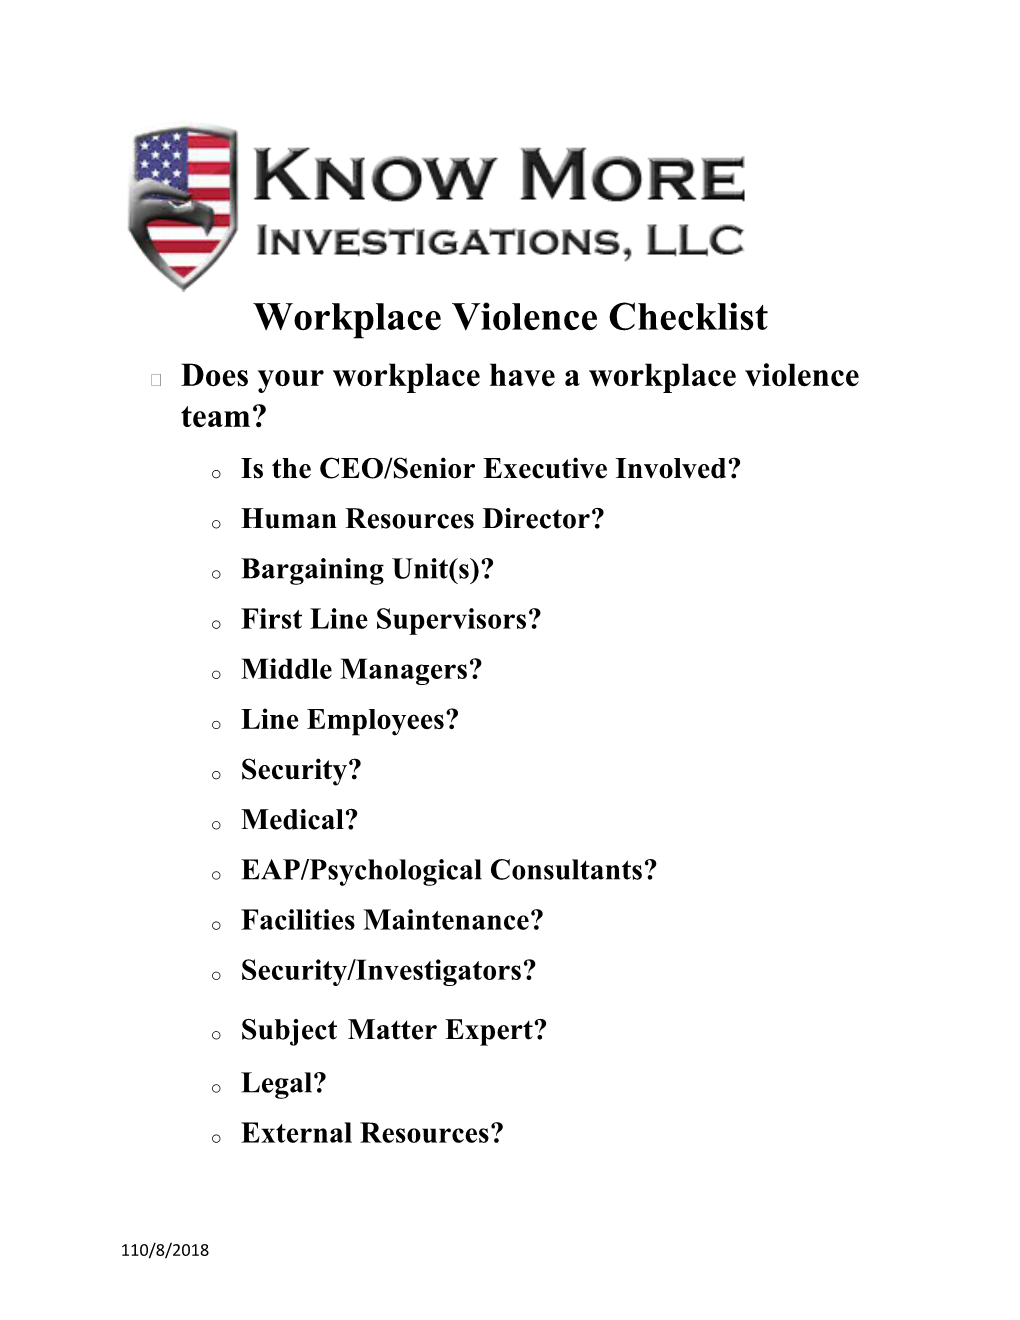 Does Your Workplace Have a Workplace Violence Team?